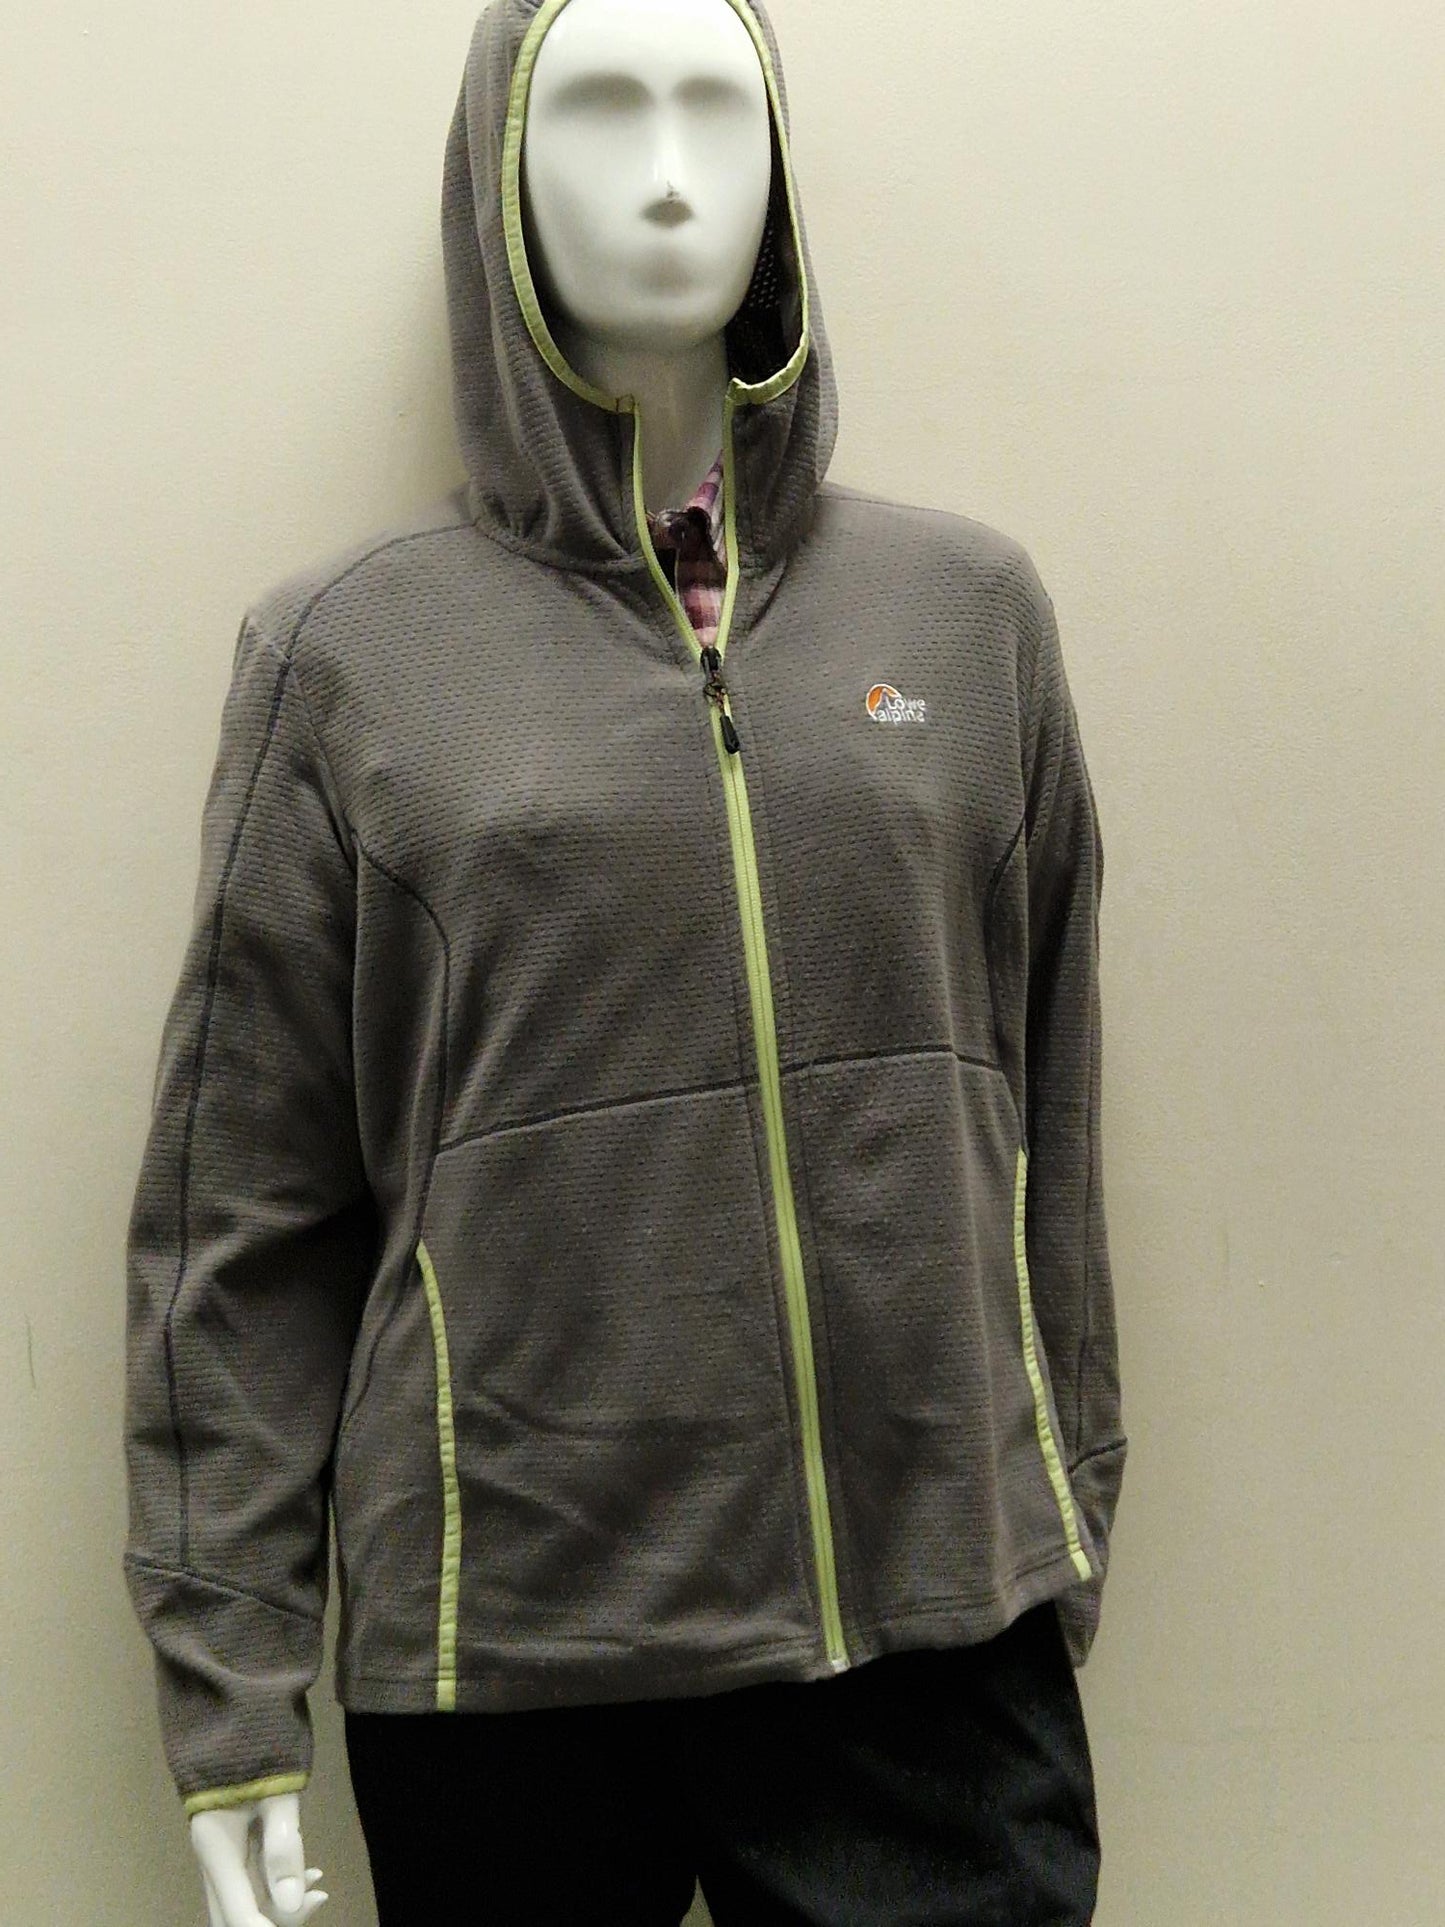 Lowe Alpine Ladies Fleece in Grey with a Lime Piping - Size Large